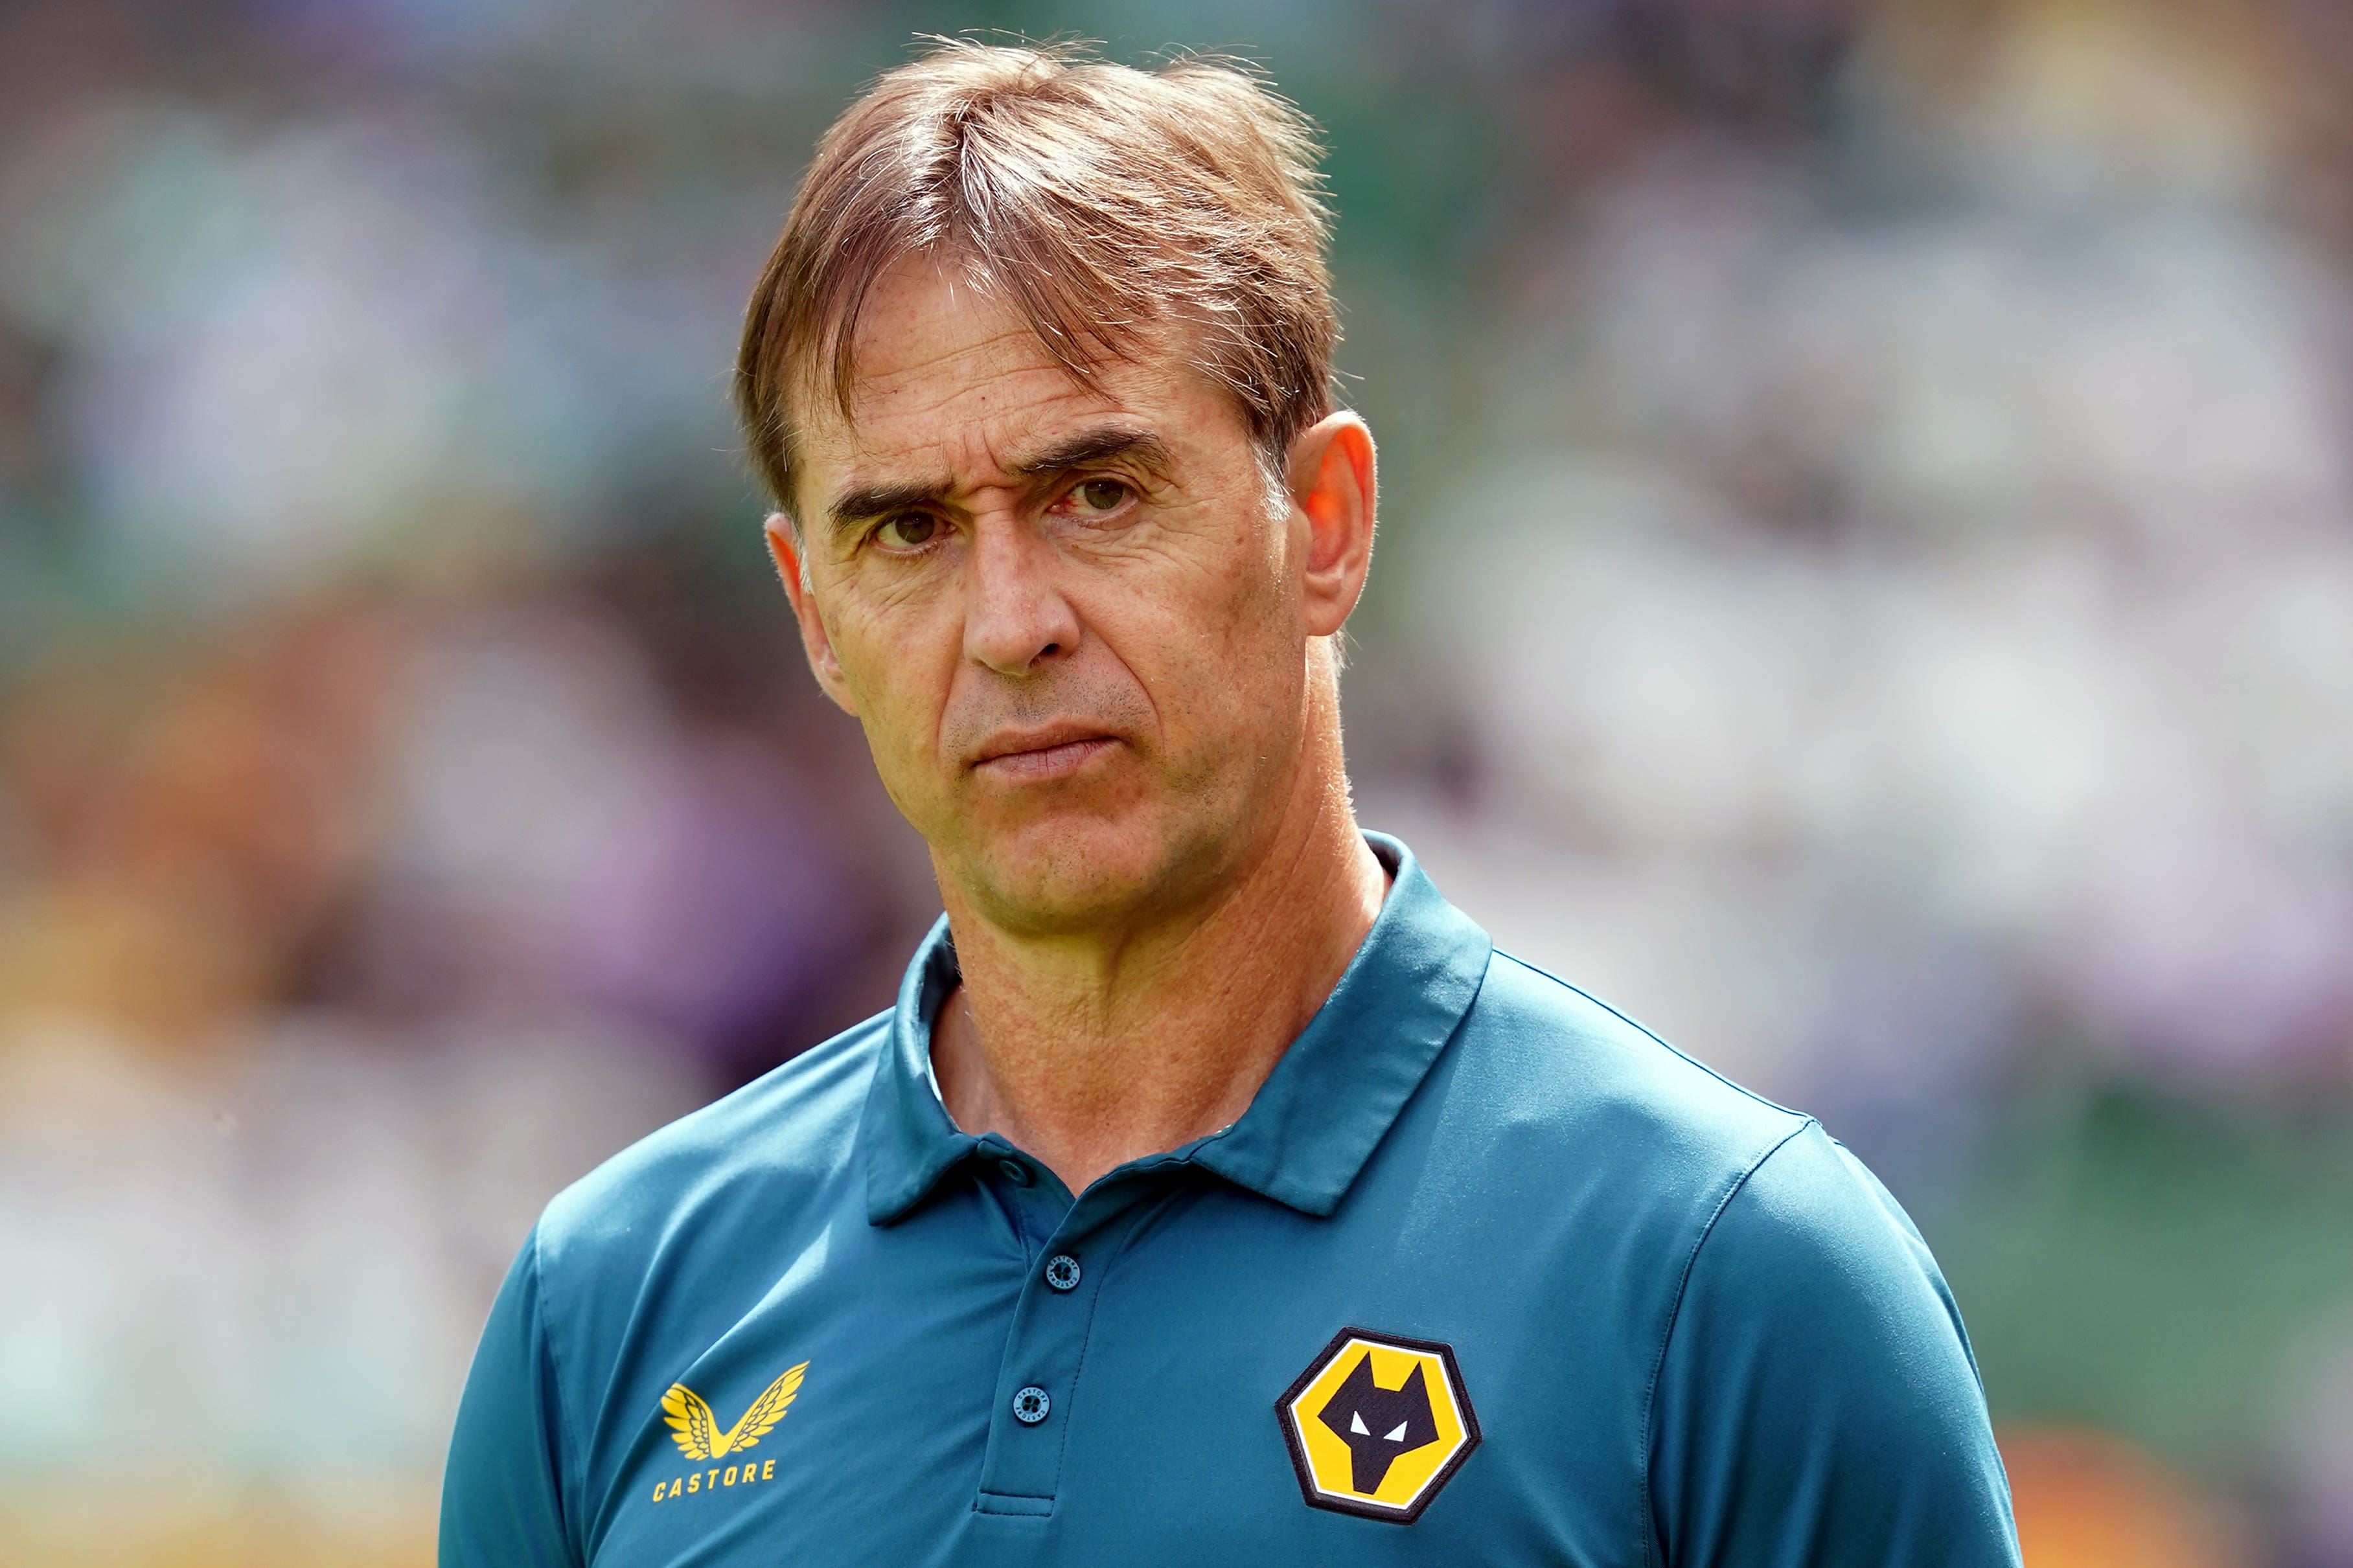 Julen Lopetegui will succeed David Moyes after he leaves West Ham United